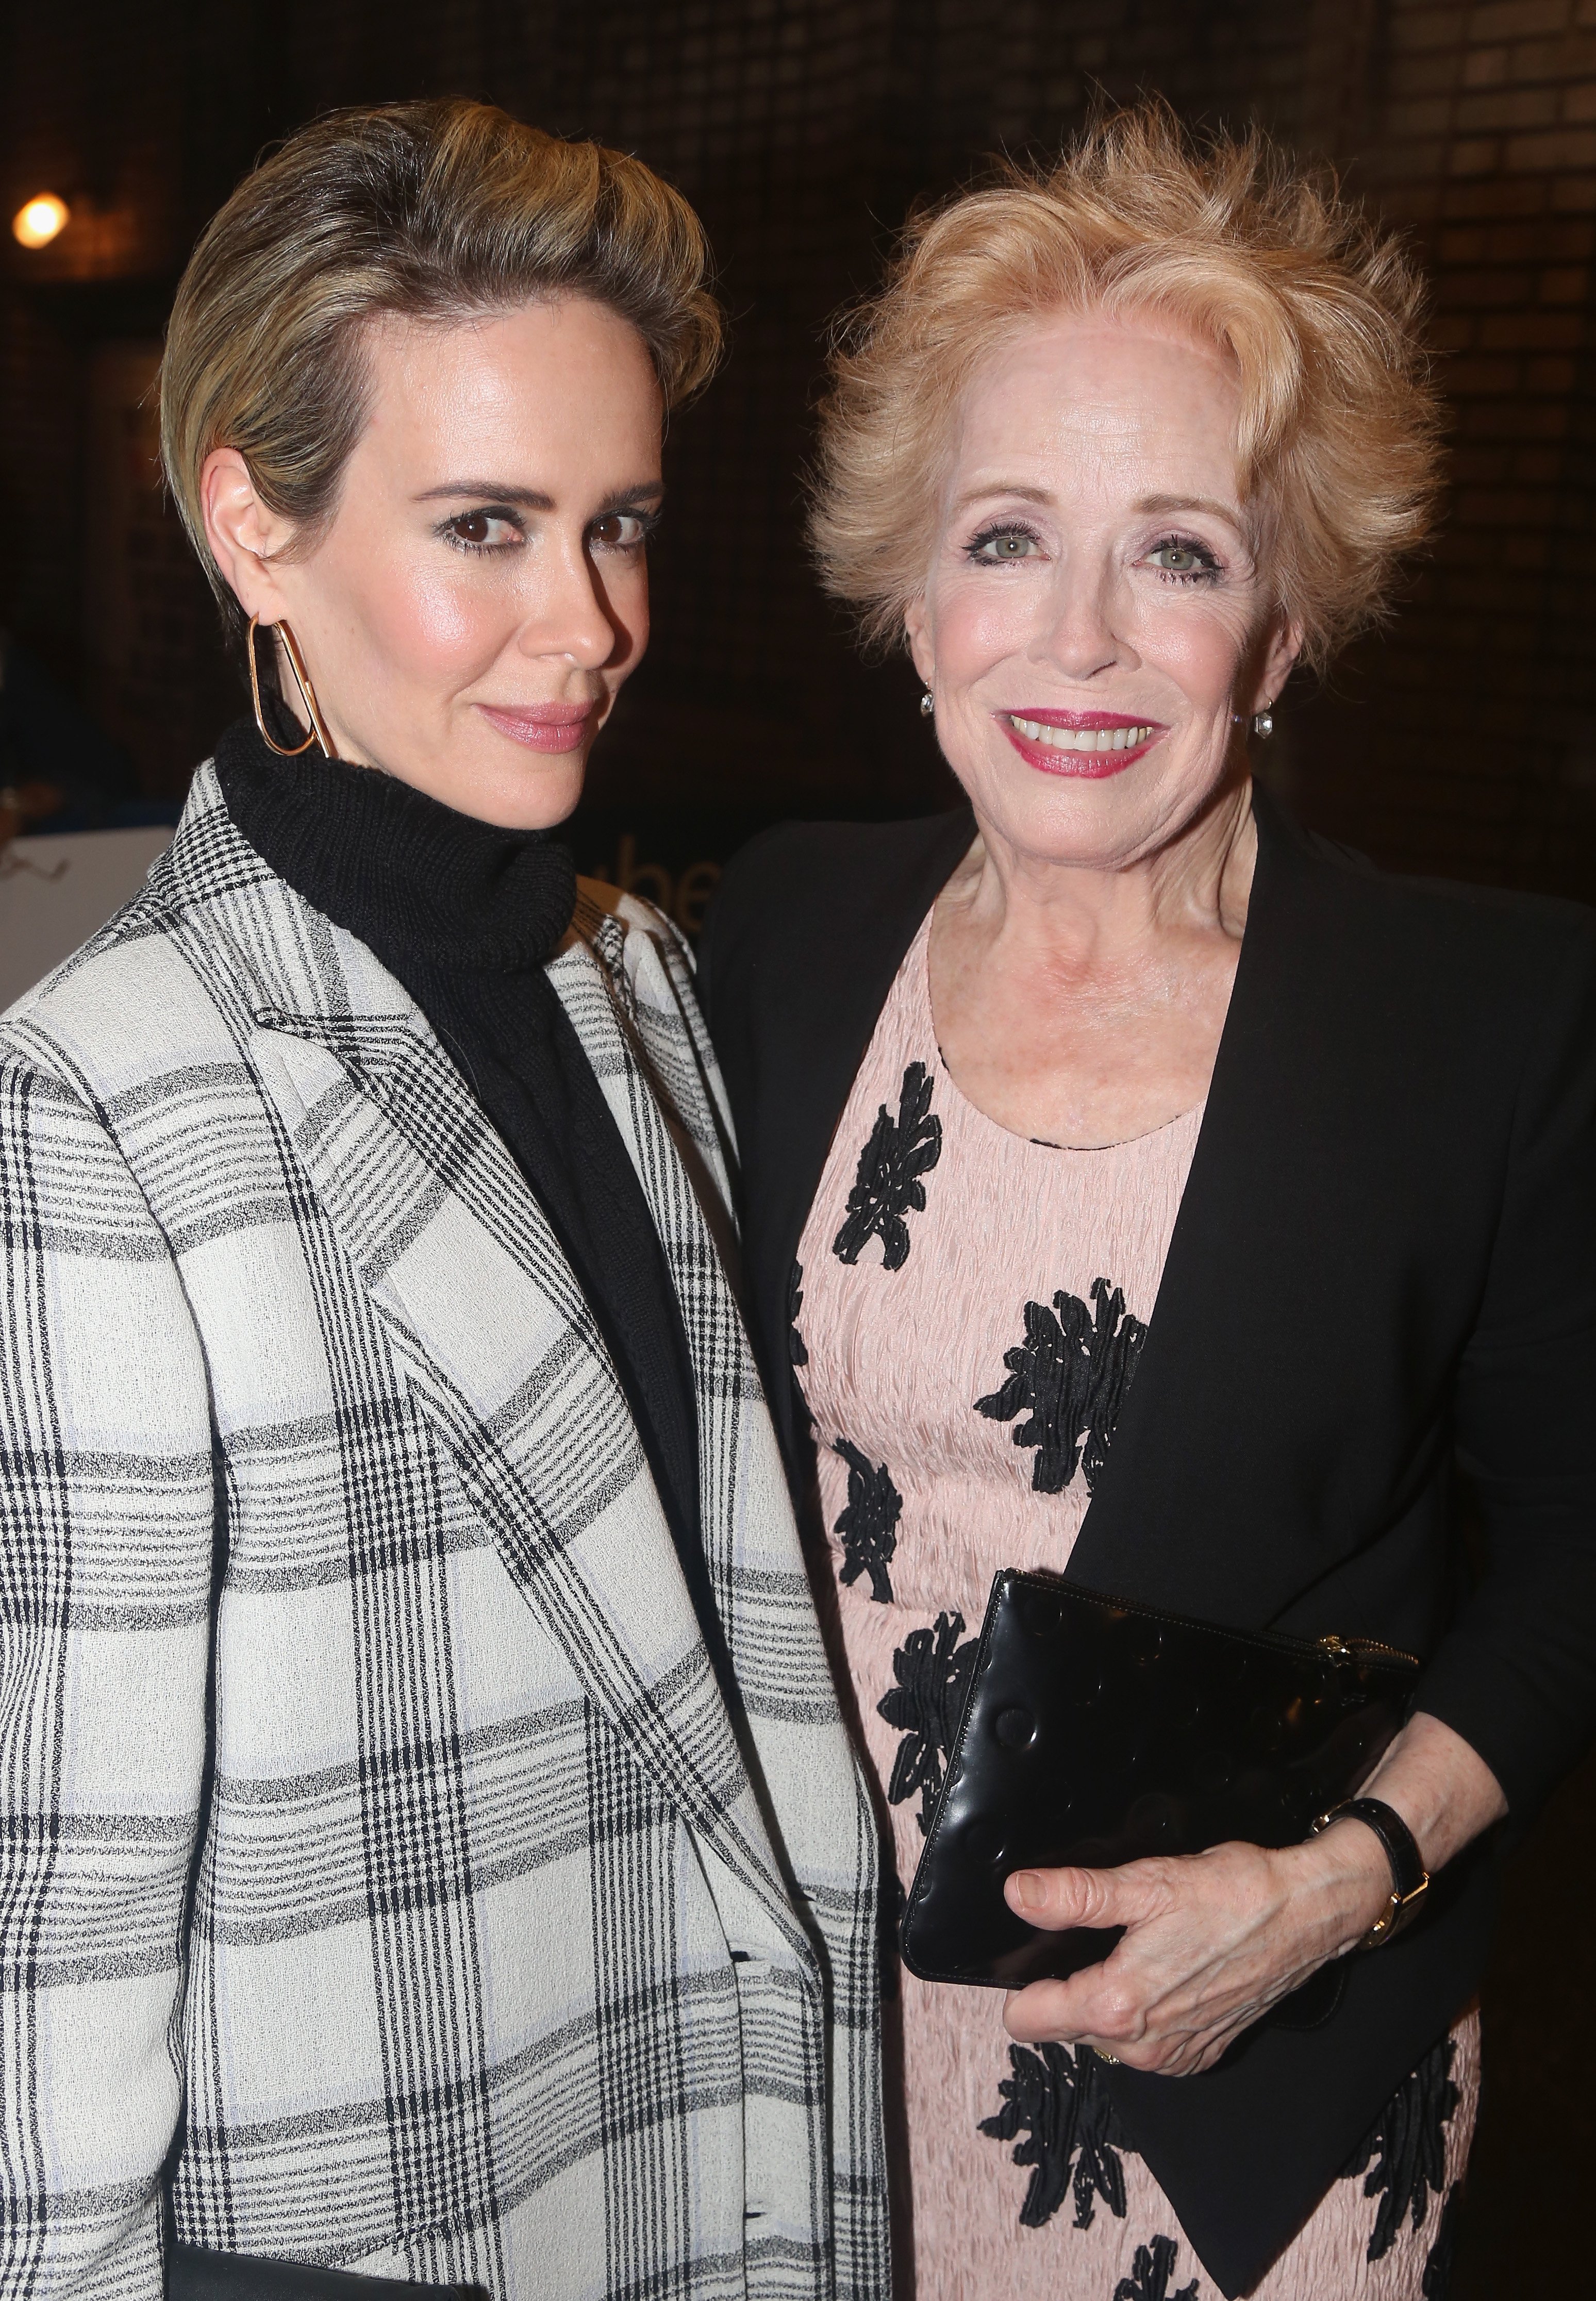 Sarah Paulson and girlfriend Holland Taylor pose at The Opening Night of "The Front Page" on Broadway at The Broadhurst Theatre on October 20, 2016 in New York City | Source: Getty Images